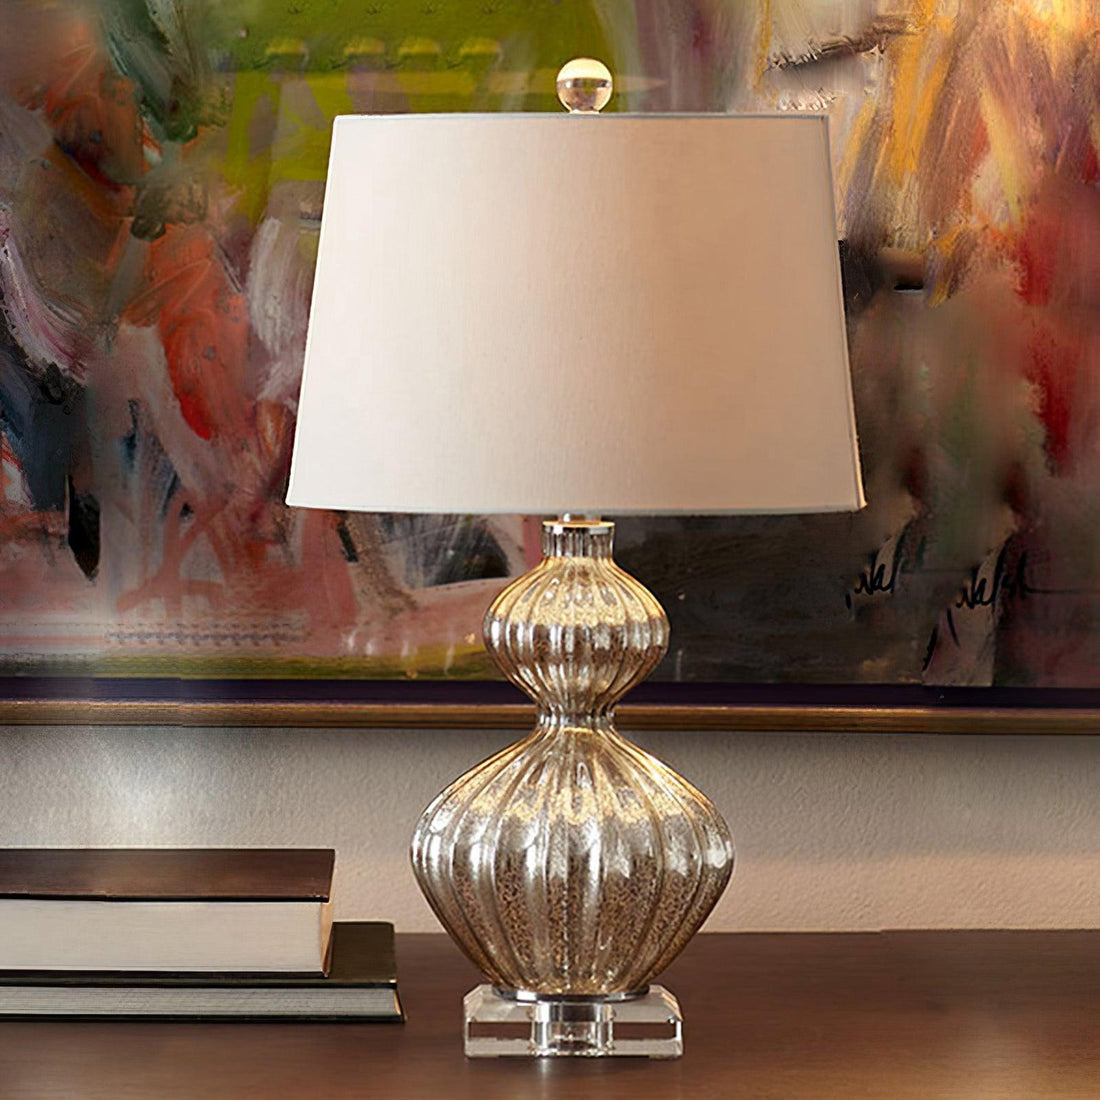 Cottage Table Lamp ∅ 13.7″